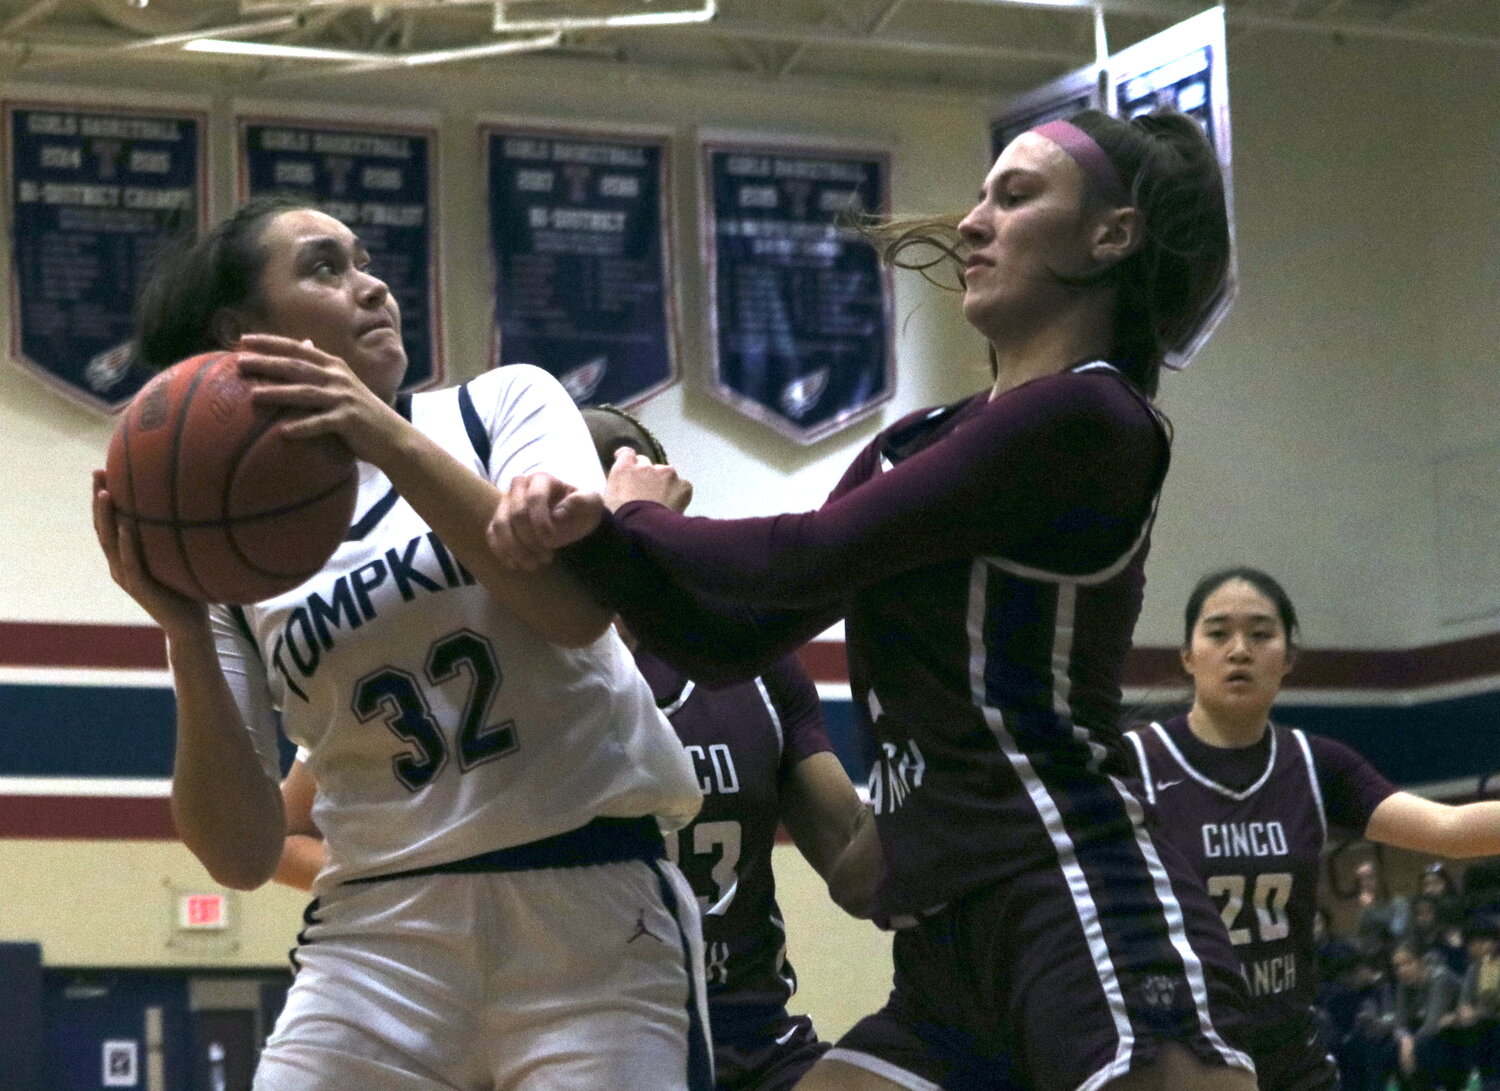 Rihanna DeLeon fights through contact to shoot a layup during Tuesday's game between Tompkins and Cinco Ranch at the Tompkins gym.